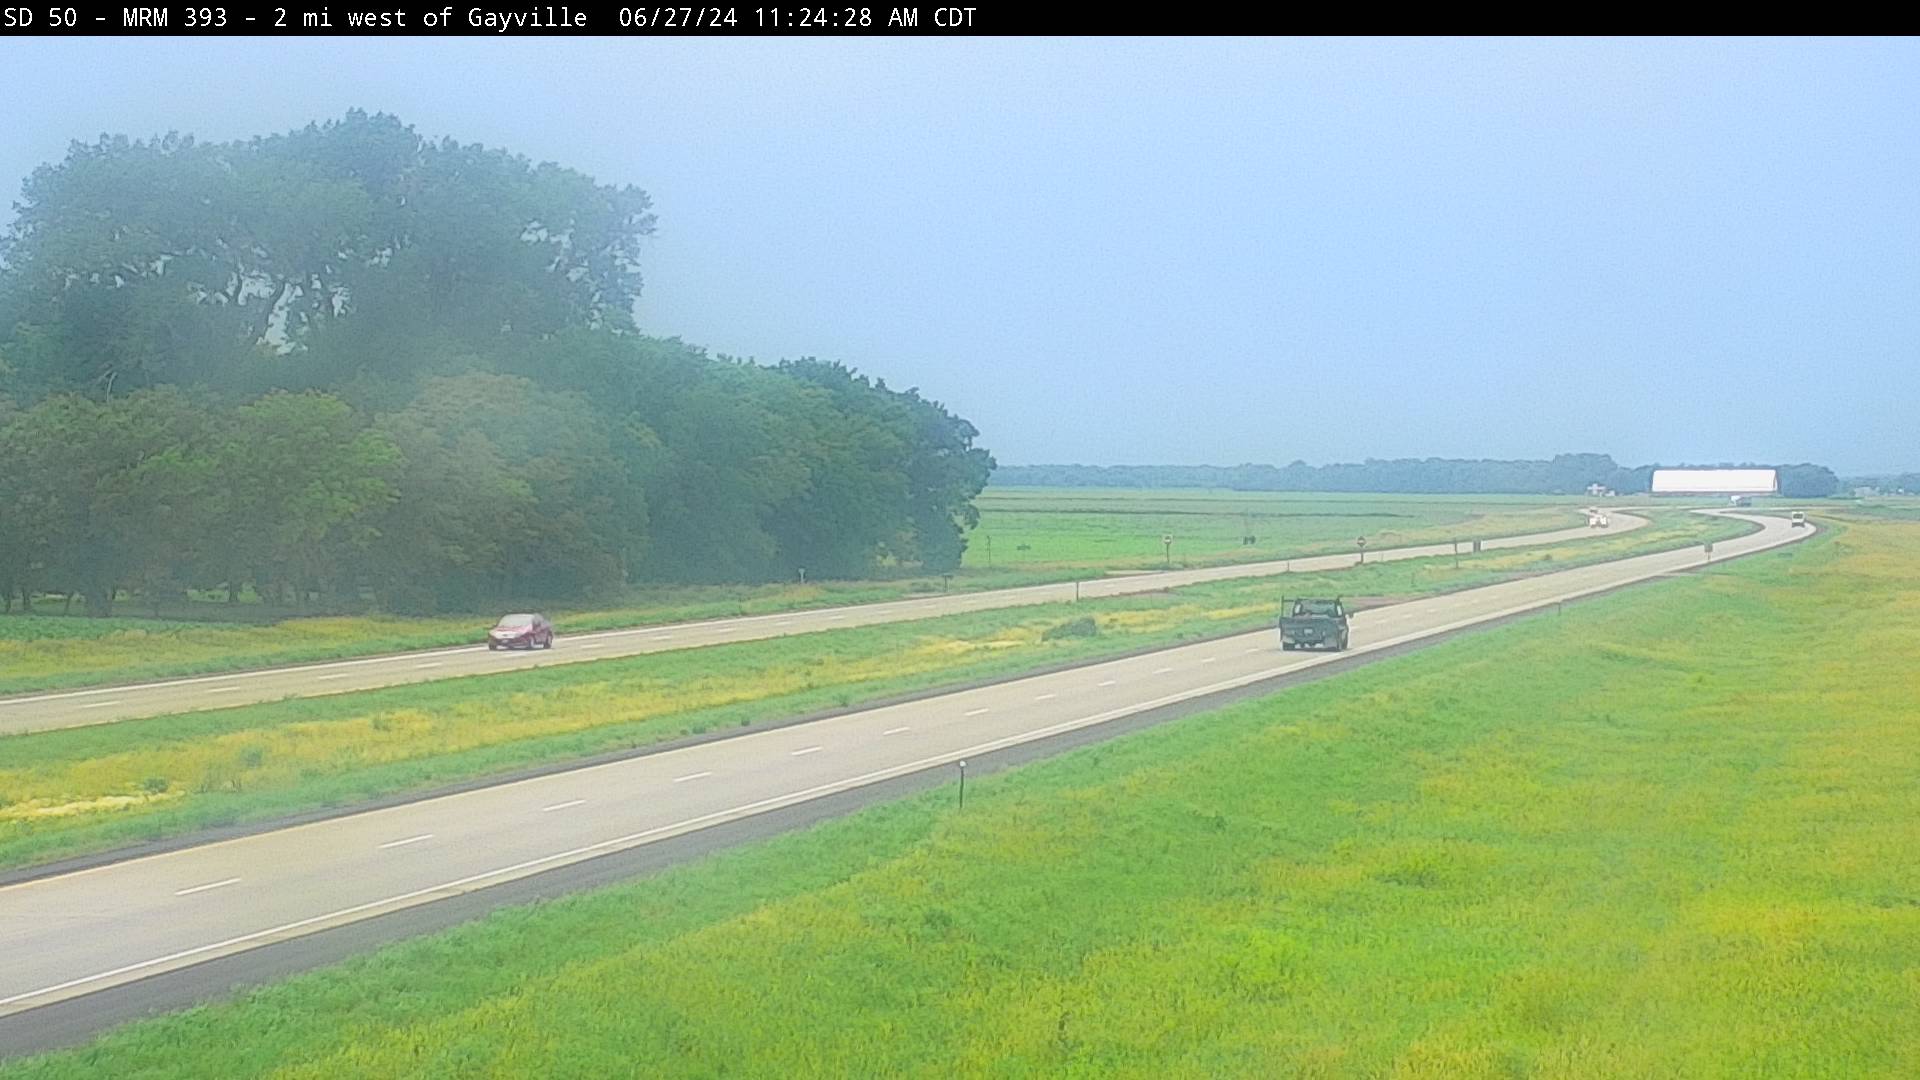 Traffic Cam 2 miles west of town along SD-50 @ MP 393 - West Player